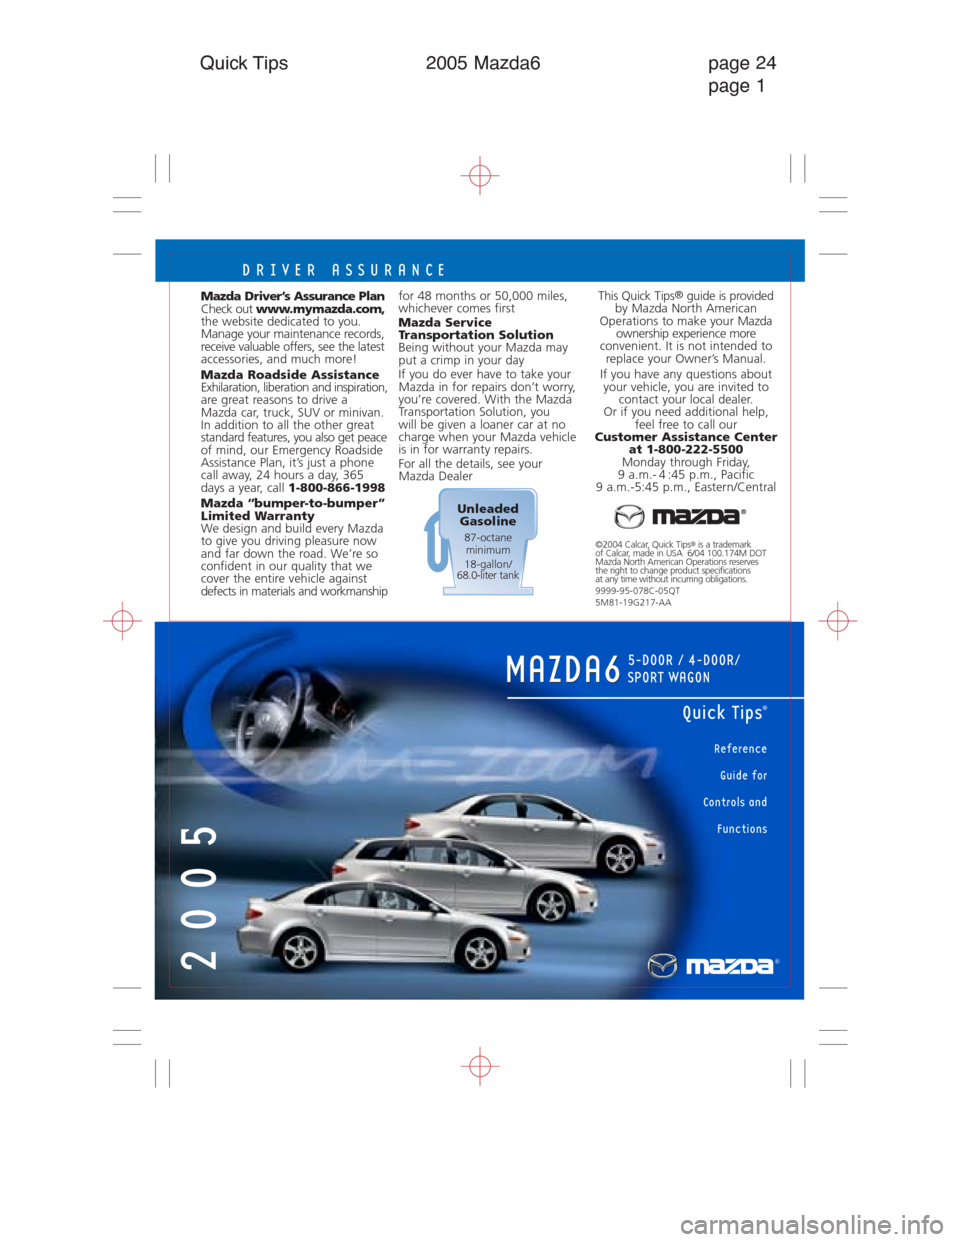 MAZDA MODEL 6 HATCHBACK 2005  Quicktips (in English) 2005
Reference
Guide for 
Controls and
Functions
Quick Tips®
®
MAZDA6MAZDA6
5-DOOR / 4-DOOR/
SPORT WAGON
Quick Tips 2005 Mazda6 page 24
page 1
DRIVER ASSURANCE
©2004 Calcar, Quick Tips®is a trade